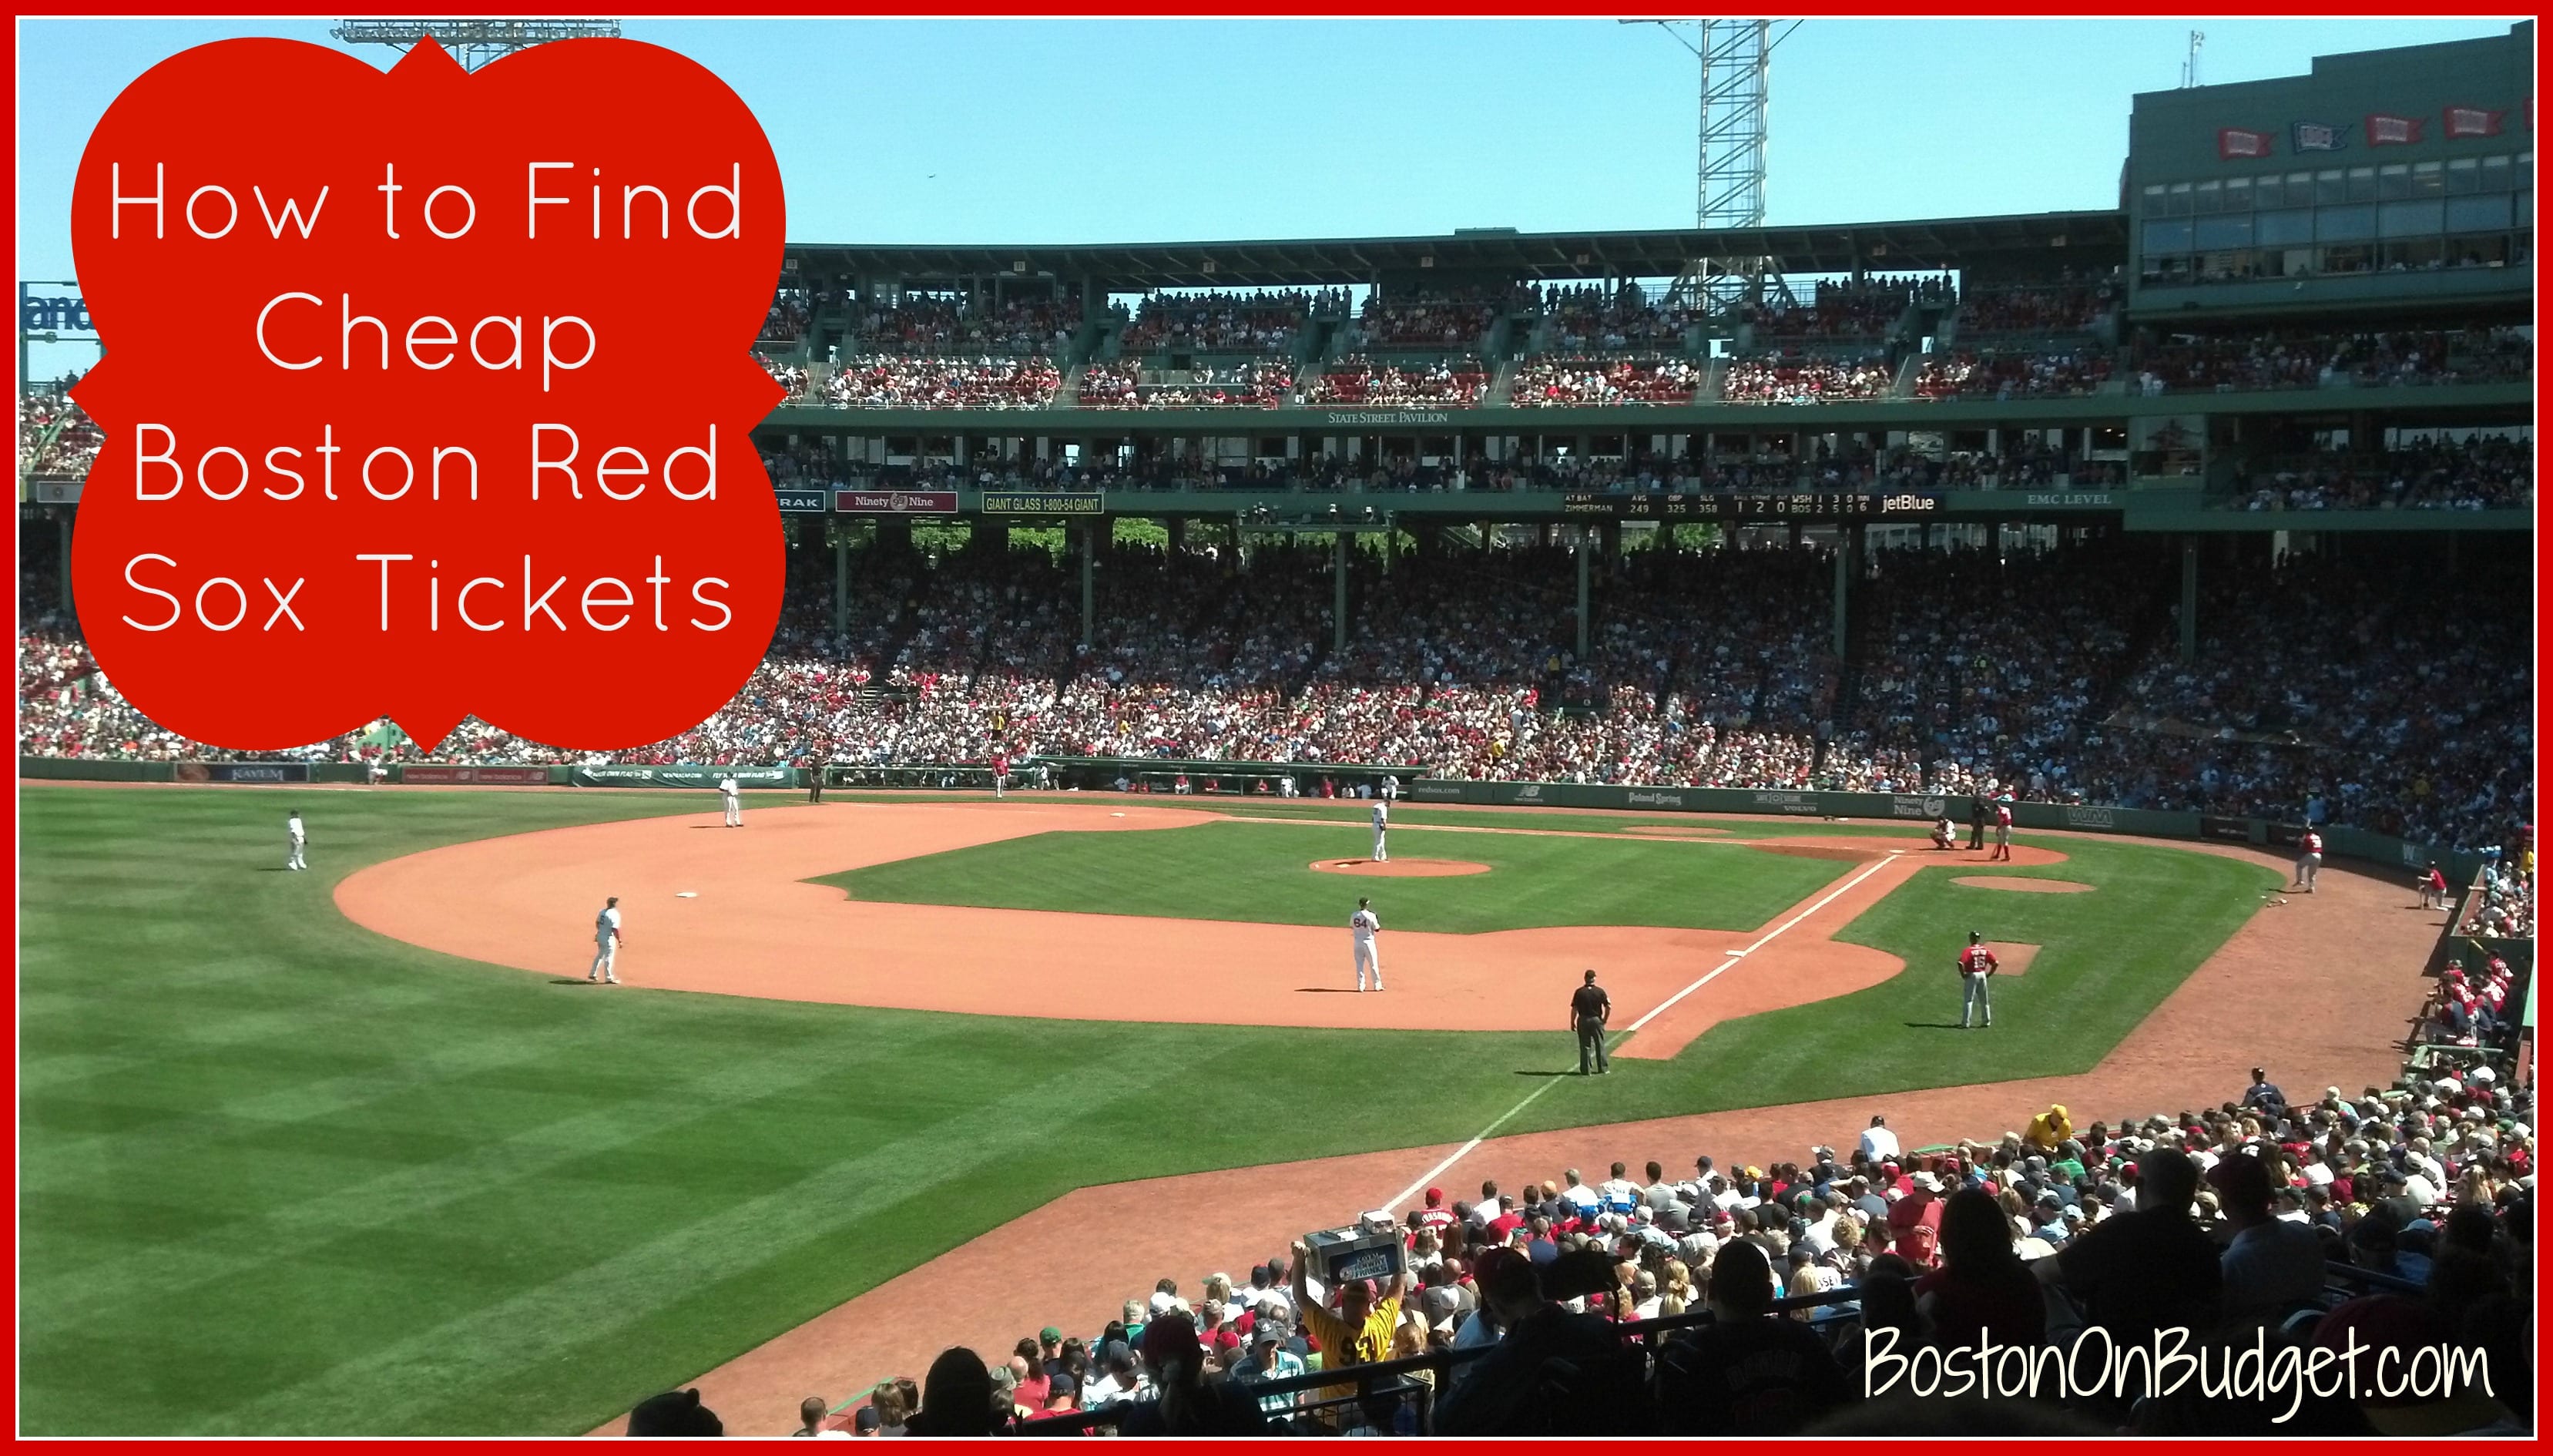 Your Budget-Friendly Guide to Watching Baseball at Fenway Park